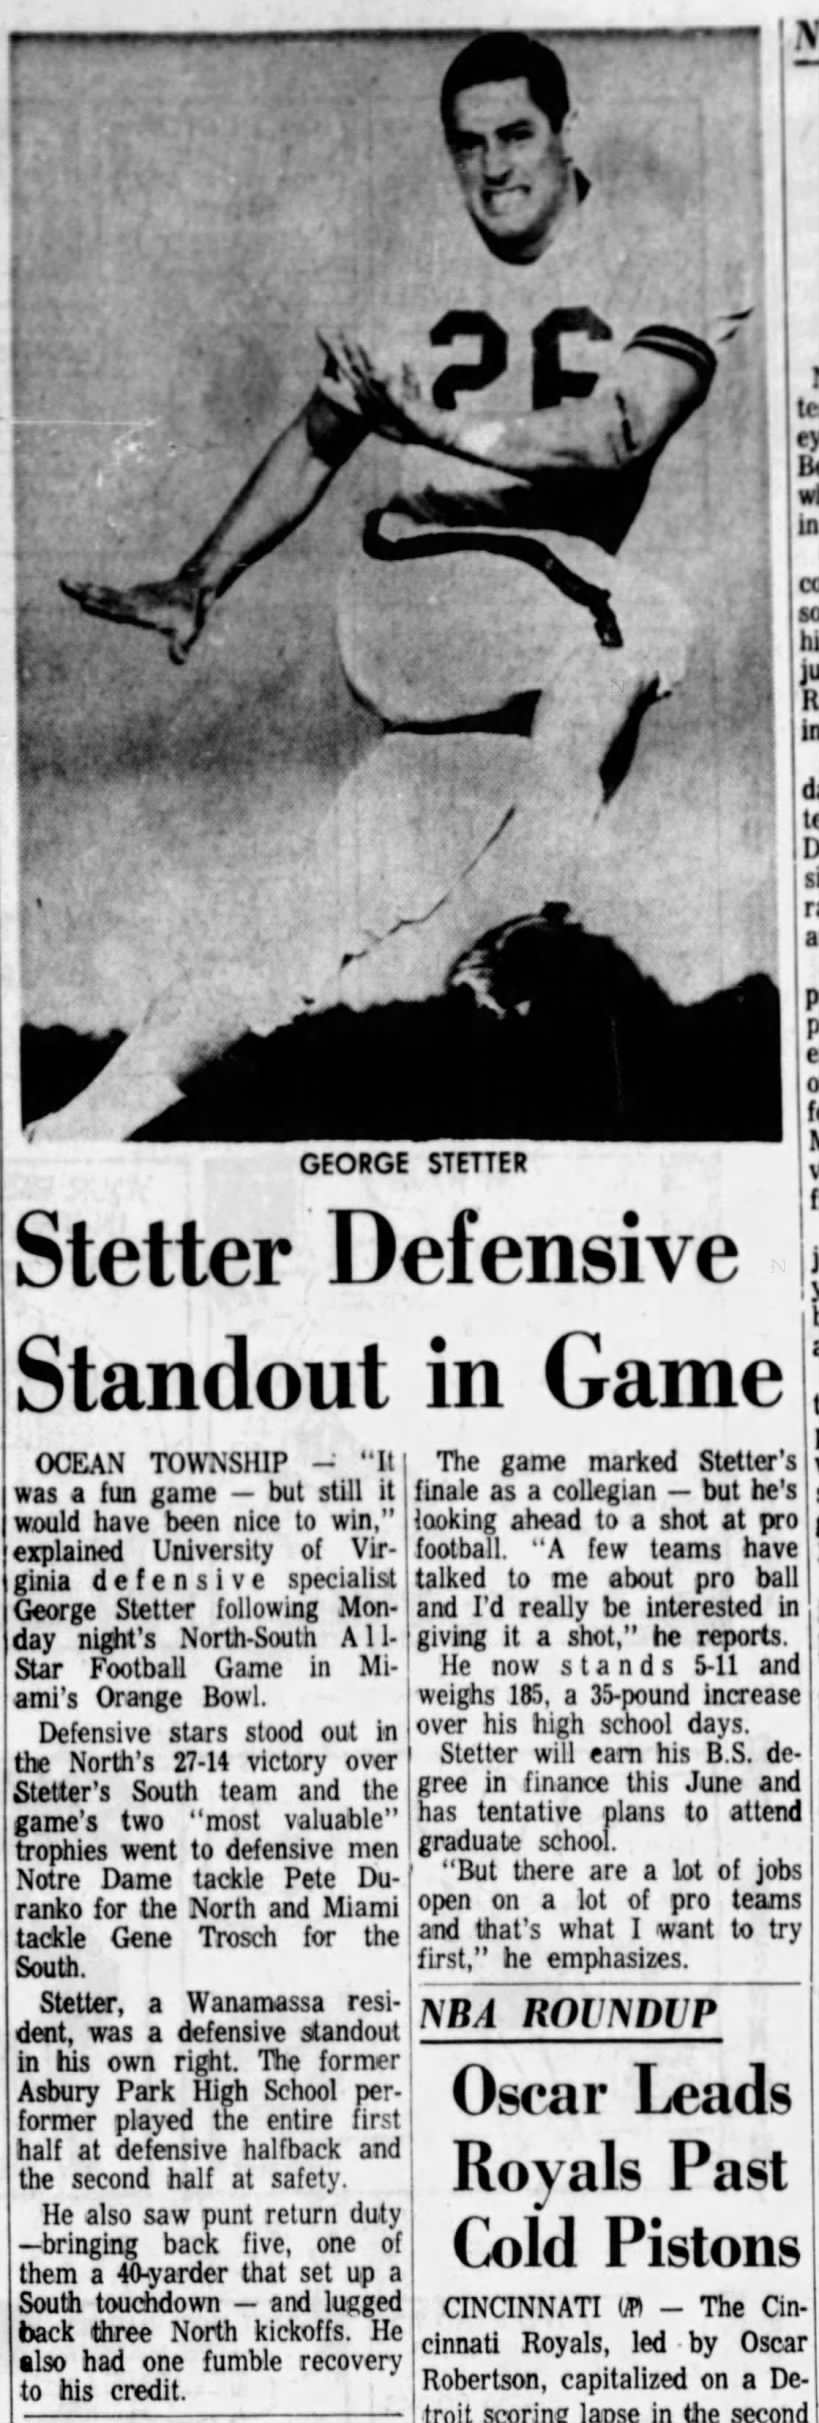 George Stetter of Ocean Township and Asbury Park High School